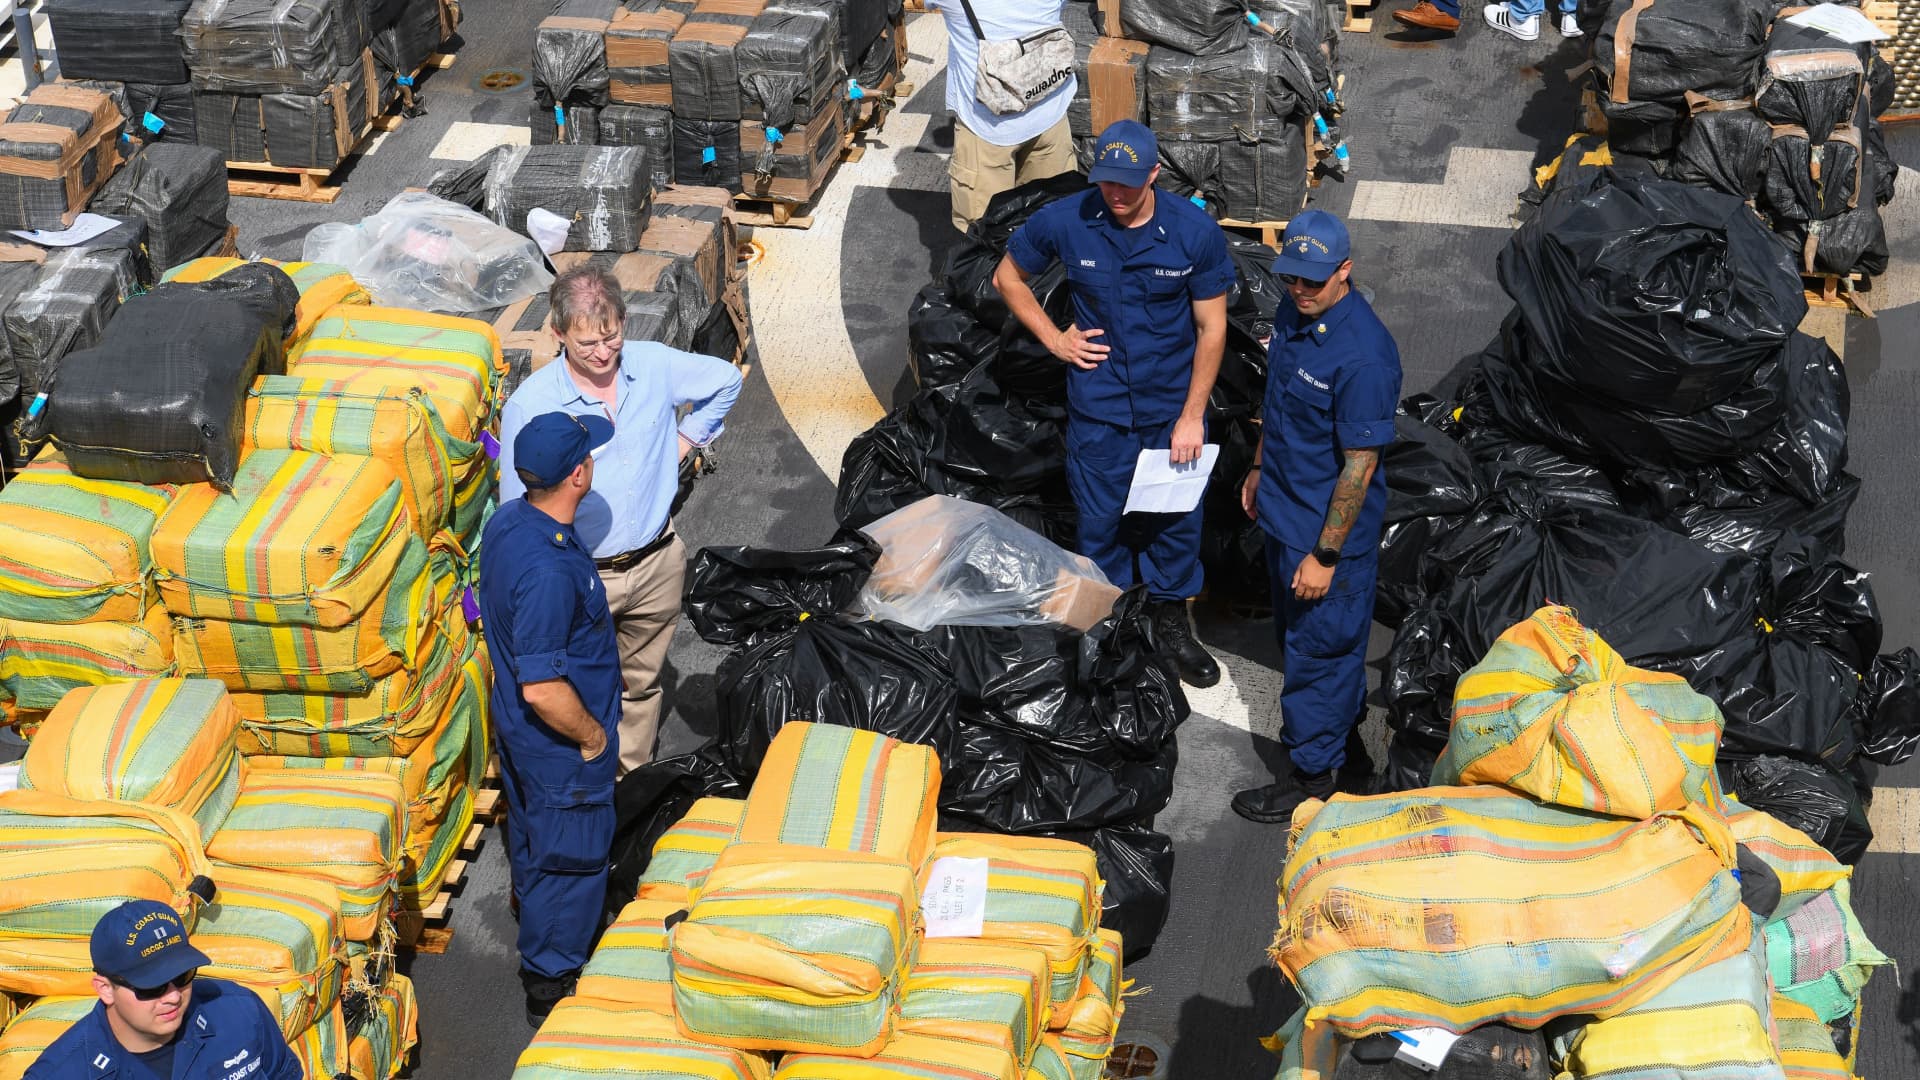 U.S. Coast Guard personnel stand on the deck of Cutter James as they offload approximately $1.06 billion in cocaine, marijuana at the Port Everglades in Fort Lauderdale, Florida on February 17, 2022.